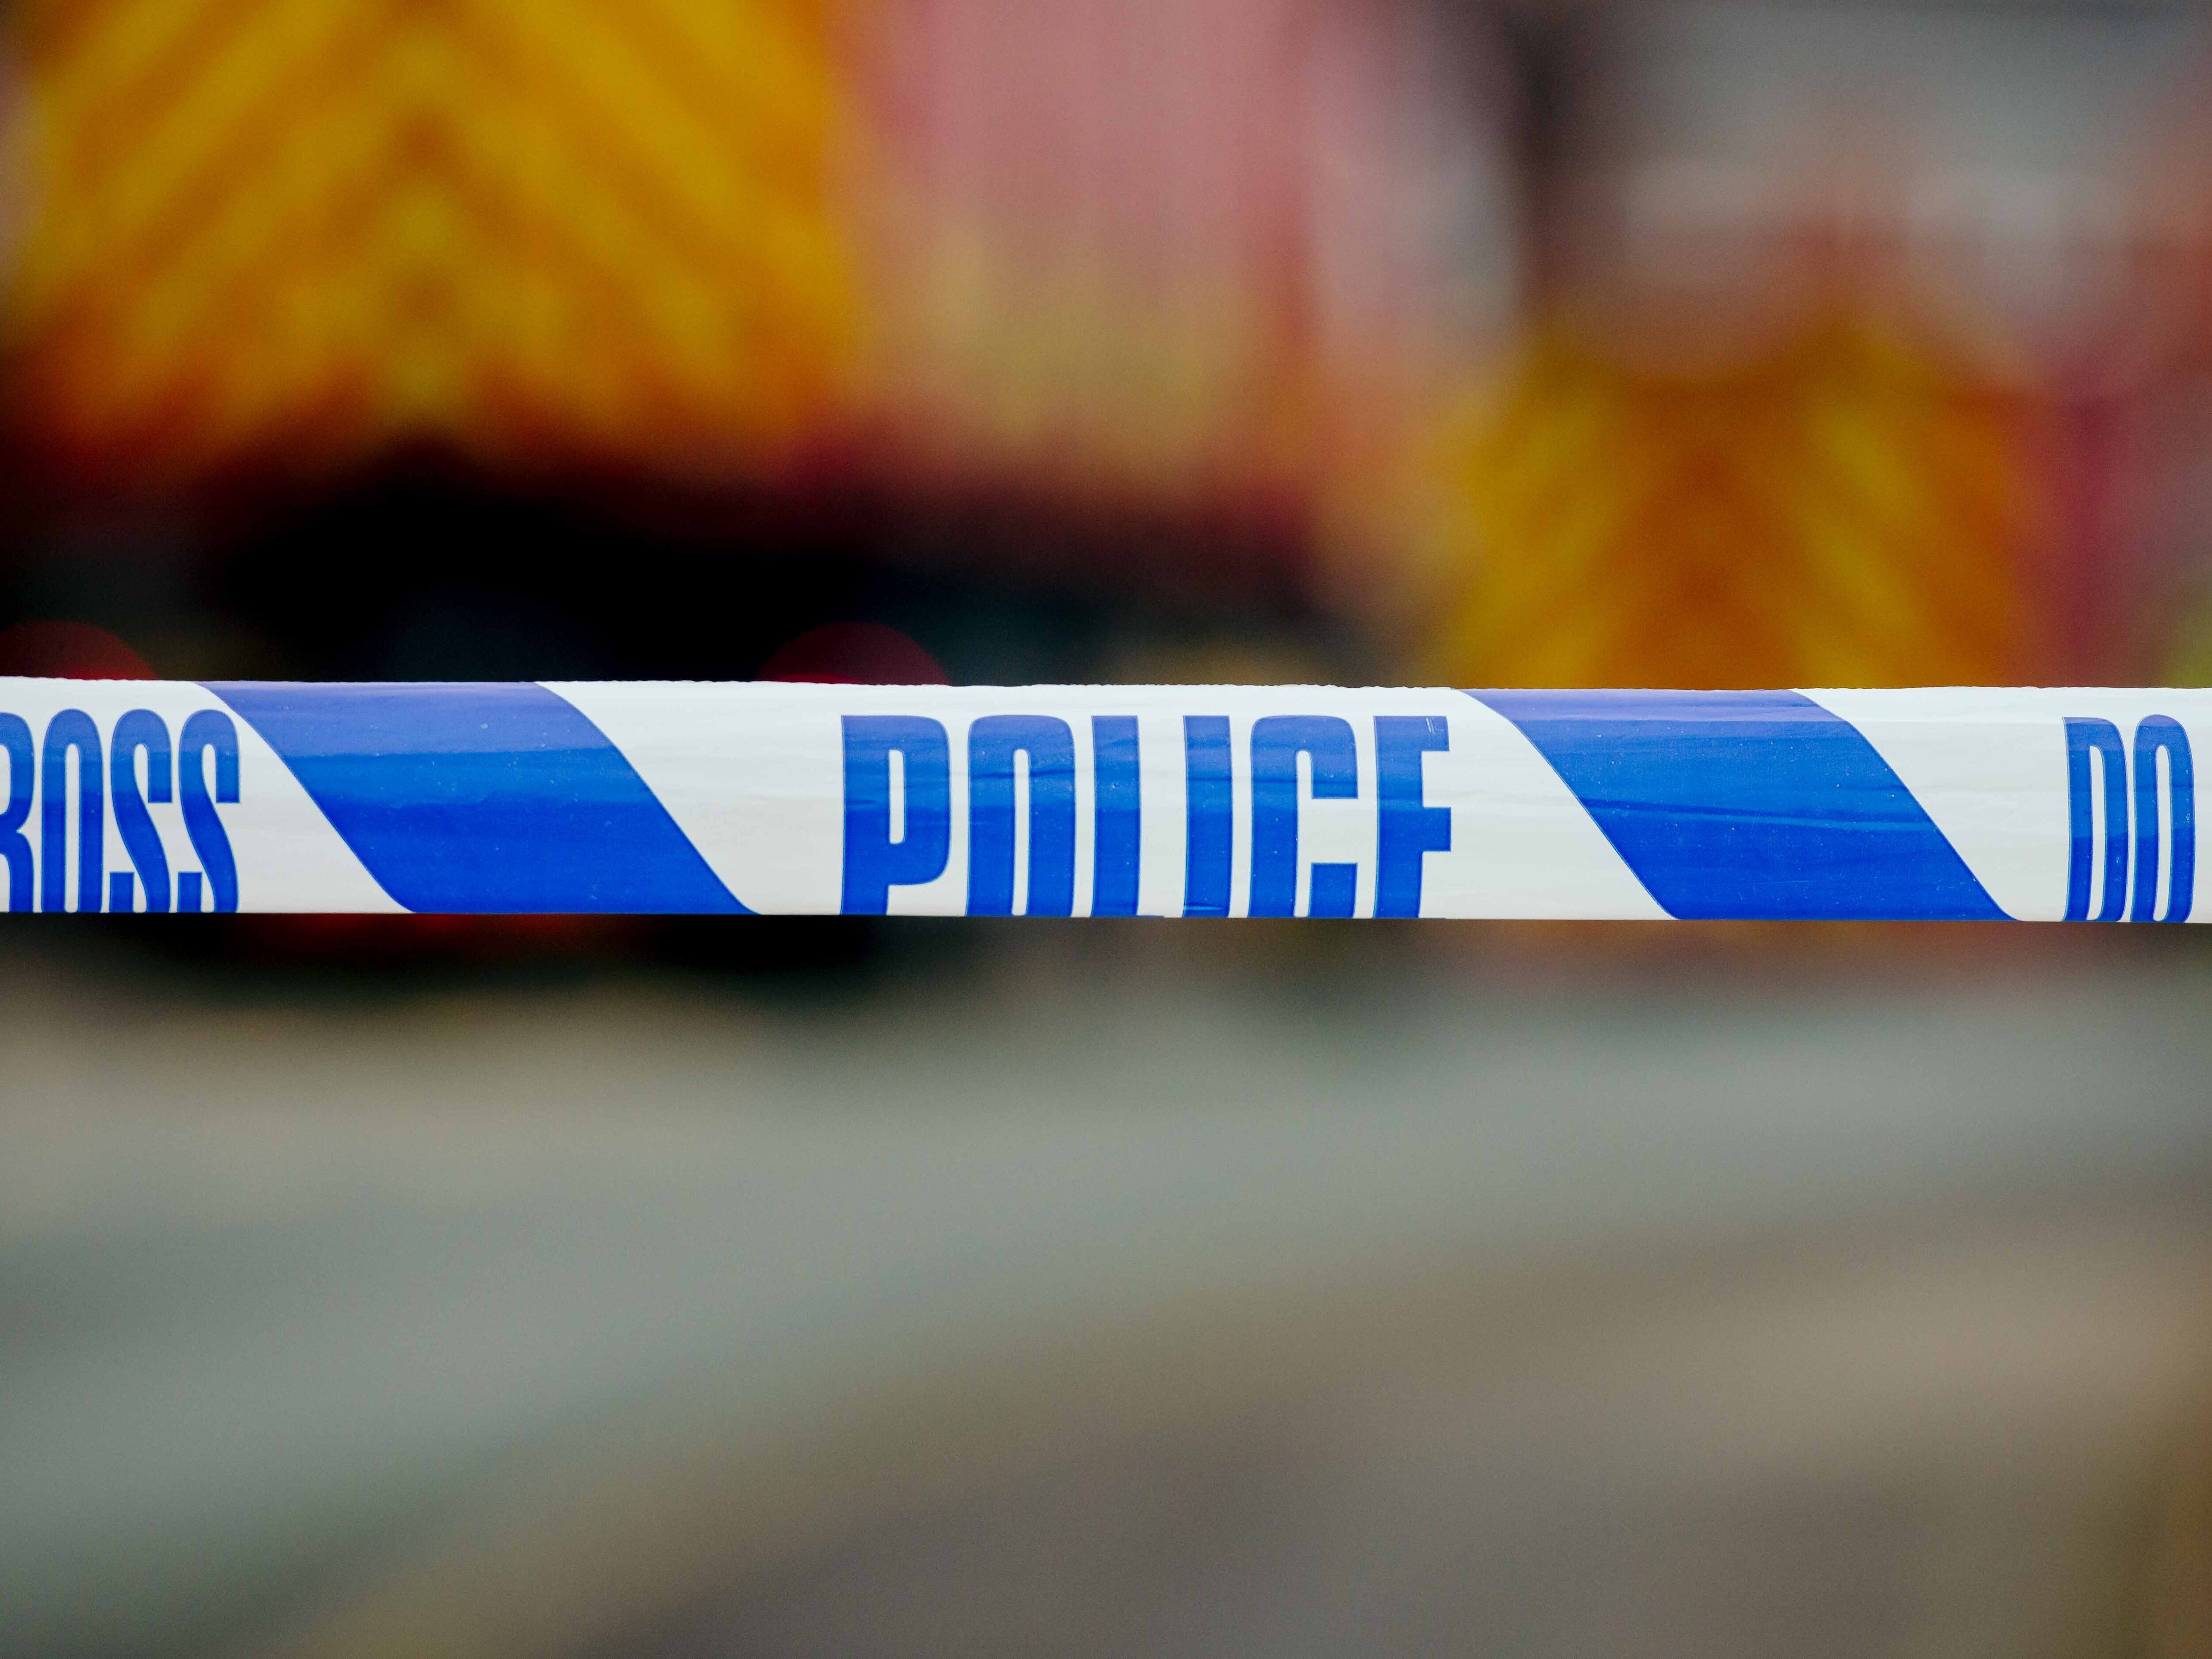 Smethwick road closed after shots fired at home in middle of the night